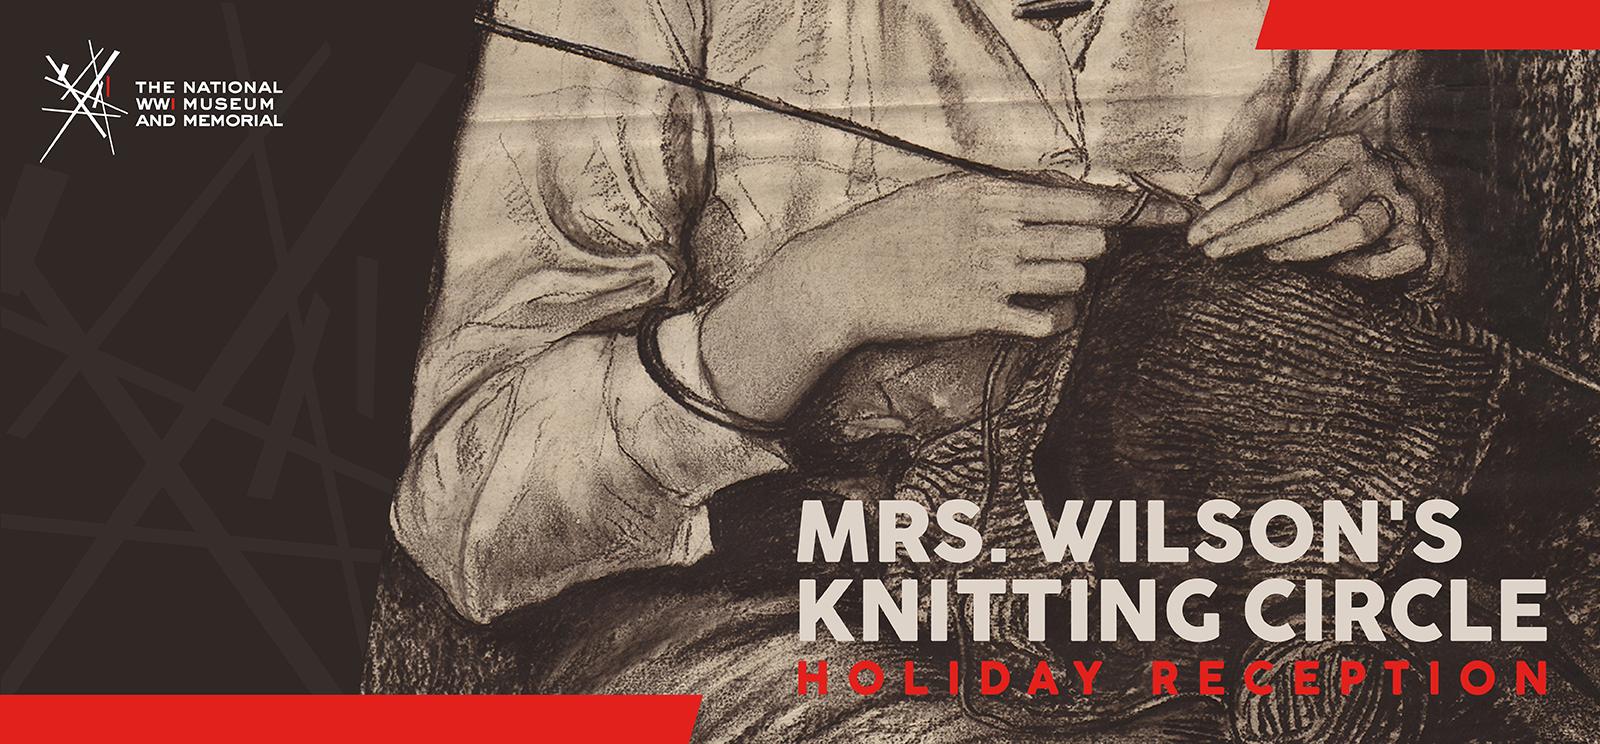 Image: Charcoal drawing of a pair of hands knitting something. Text: Mrs. Wilson's Knitting Circle: / Holiday Reception